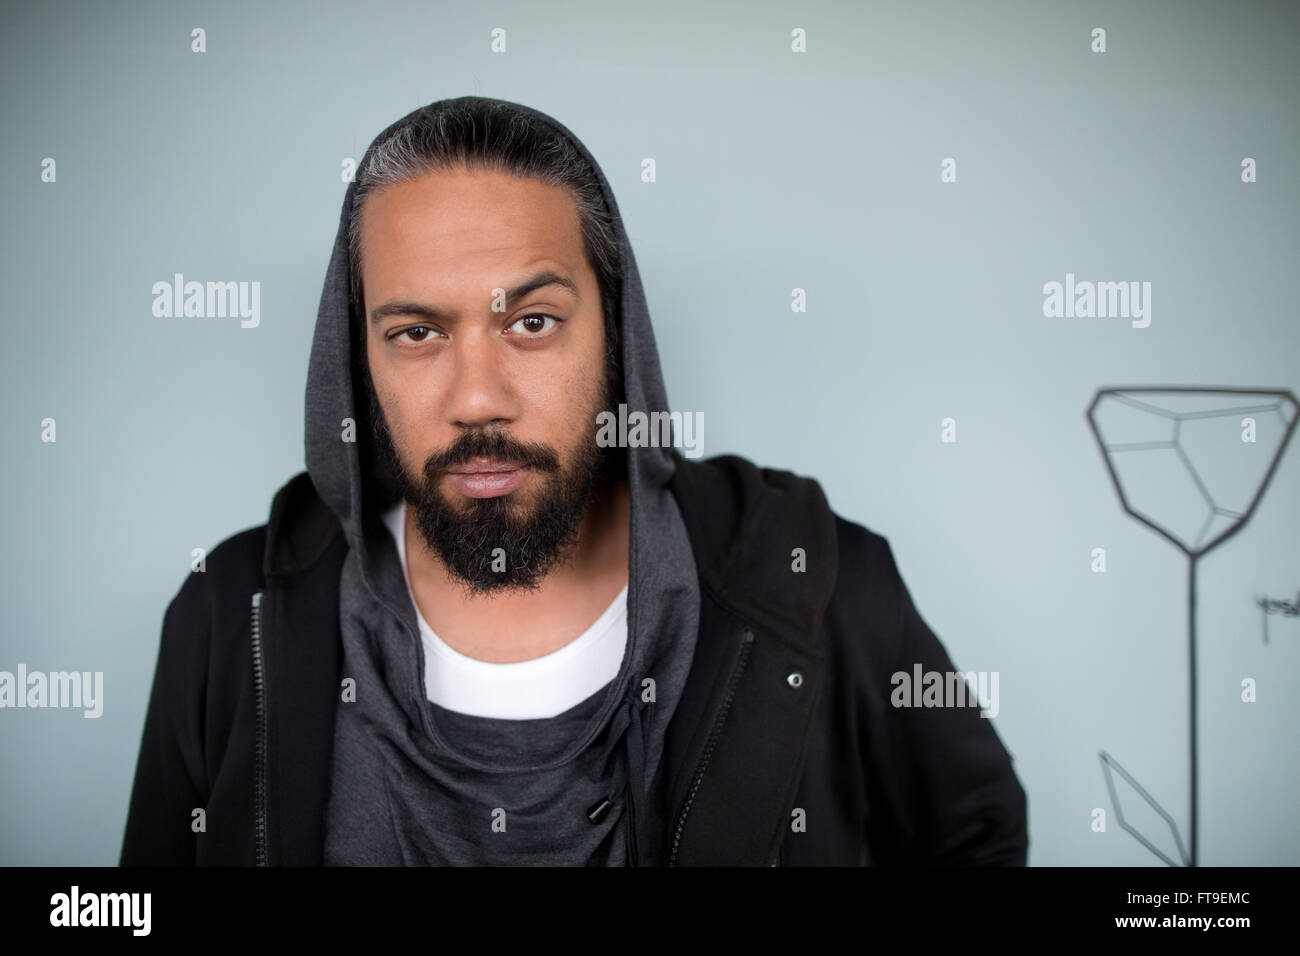 Berlin, Germany. 22nd Mar, 2016. Musician Samy Deluxe poses during an interview in Berlin, Germany, 22 March 2016. His album 'Beruehmte Letzte Worte' (lit. famous last words) comes out on 29 April 2016. Photo: Joerg Carstensen/dpa/Alamy Live News Stock Photo